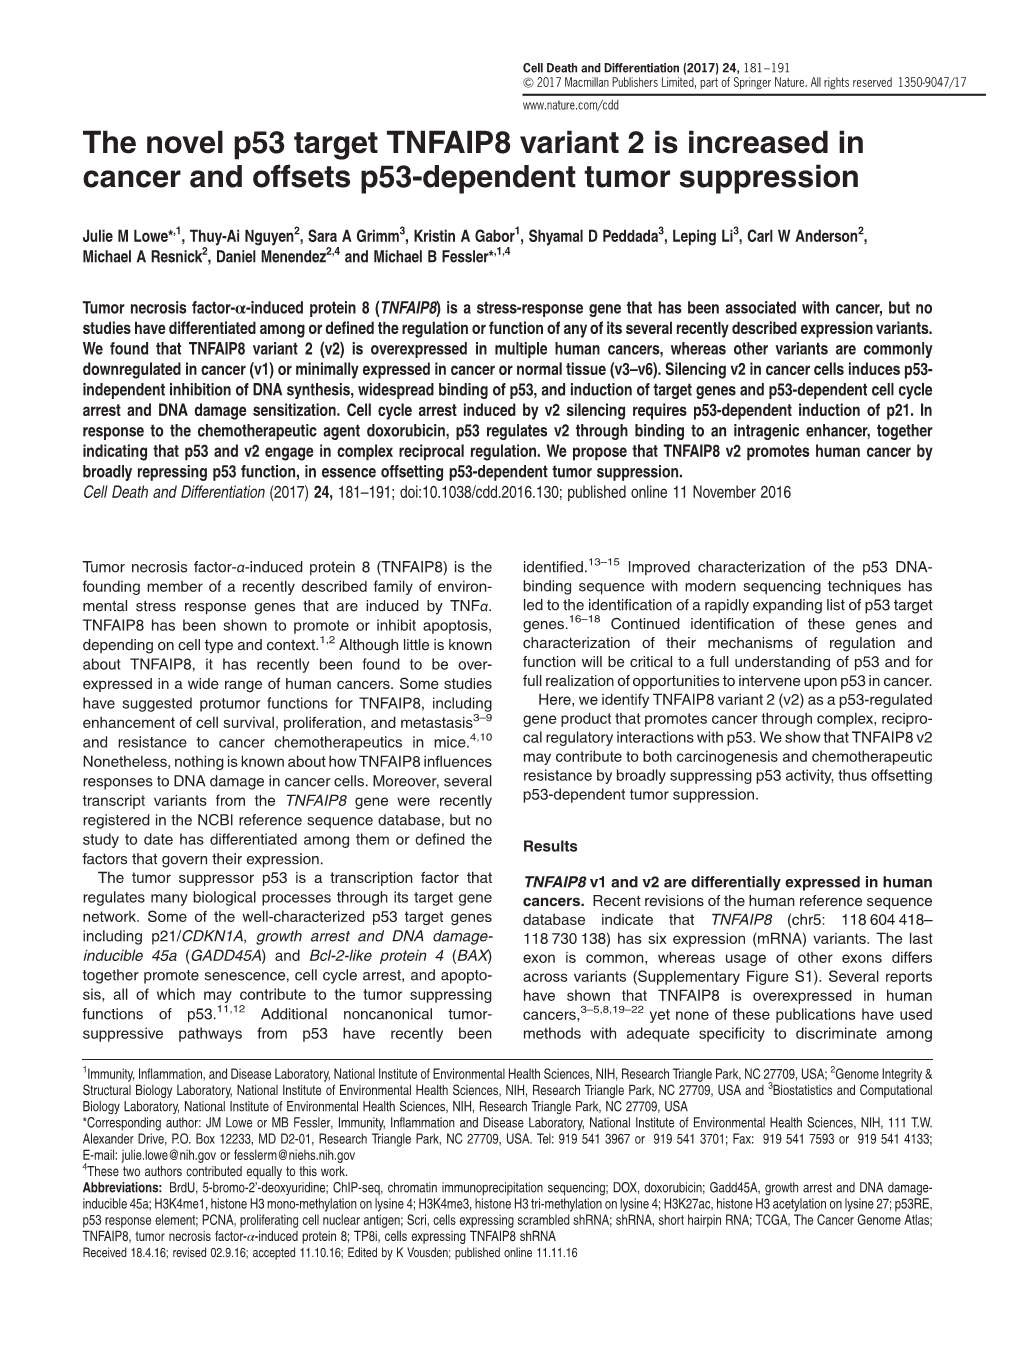 The Novel P53 Target TNFAIP8 Variant 2 Is Increased in Cancer and Offsets P53-Dependent Tumor Suppression